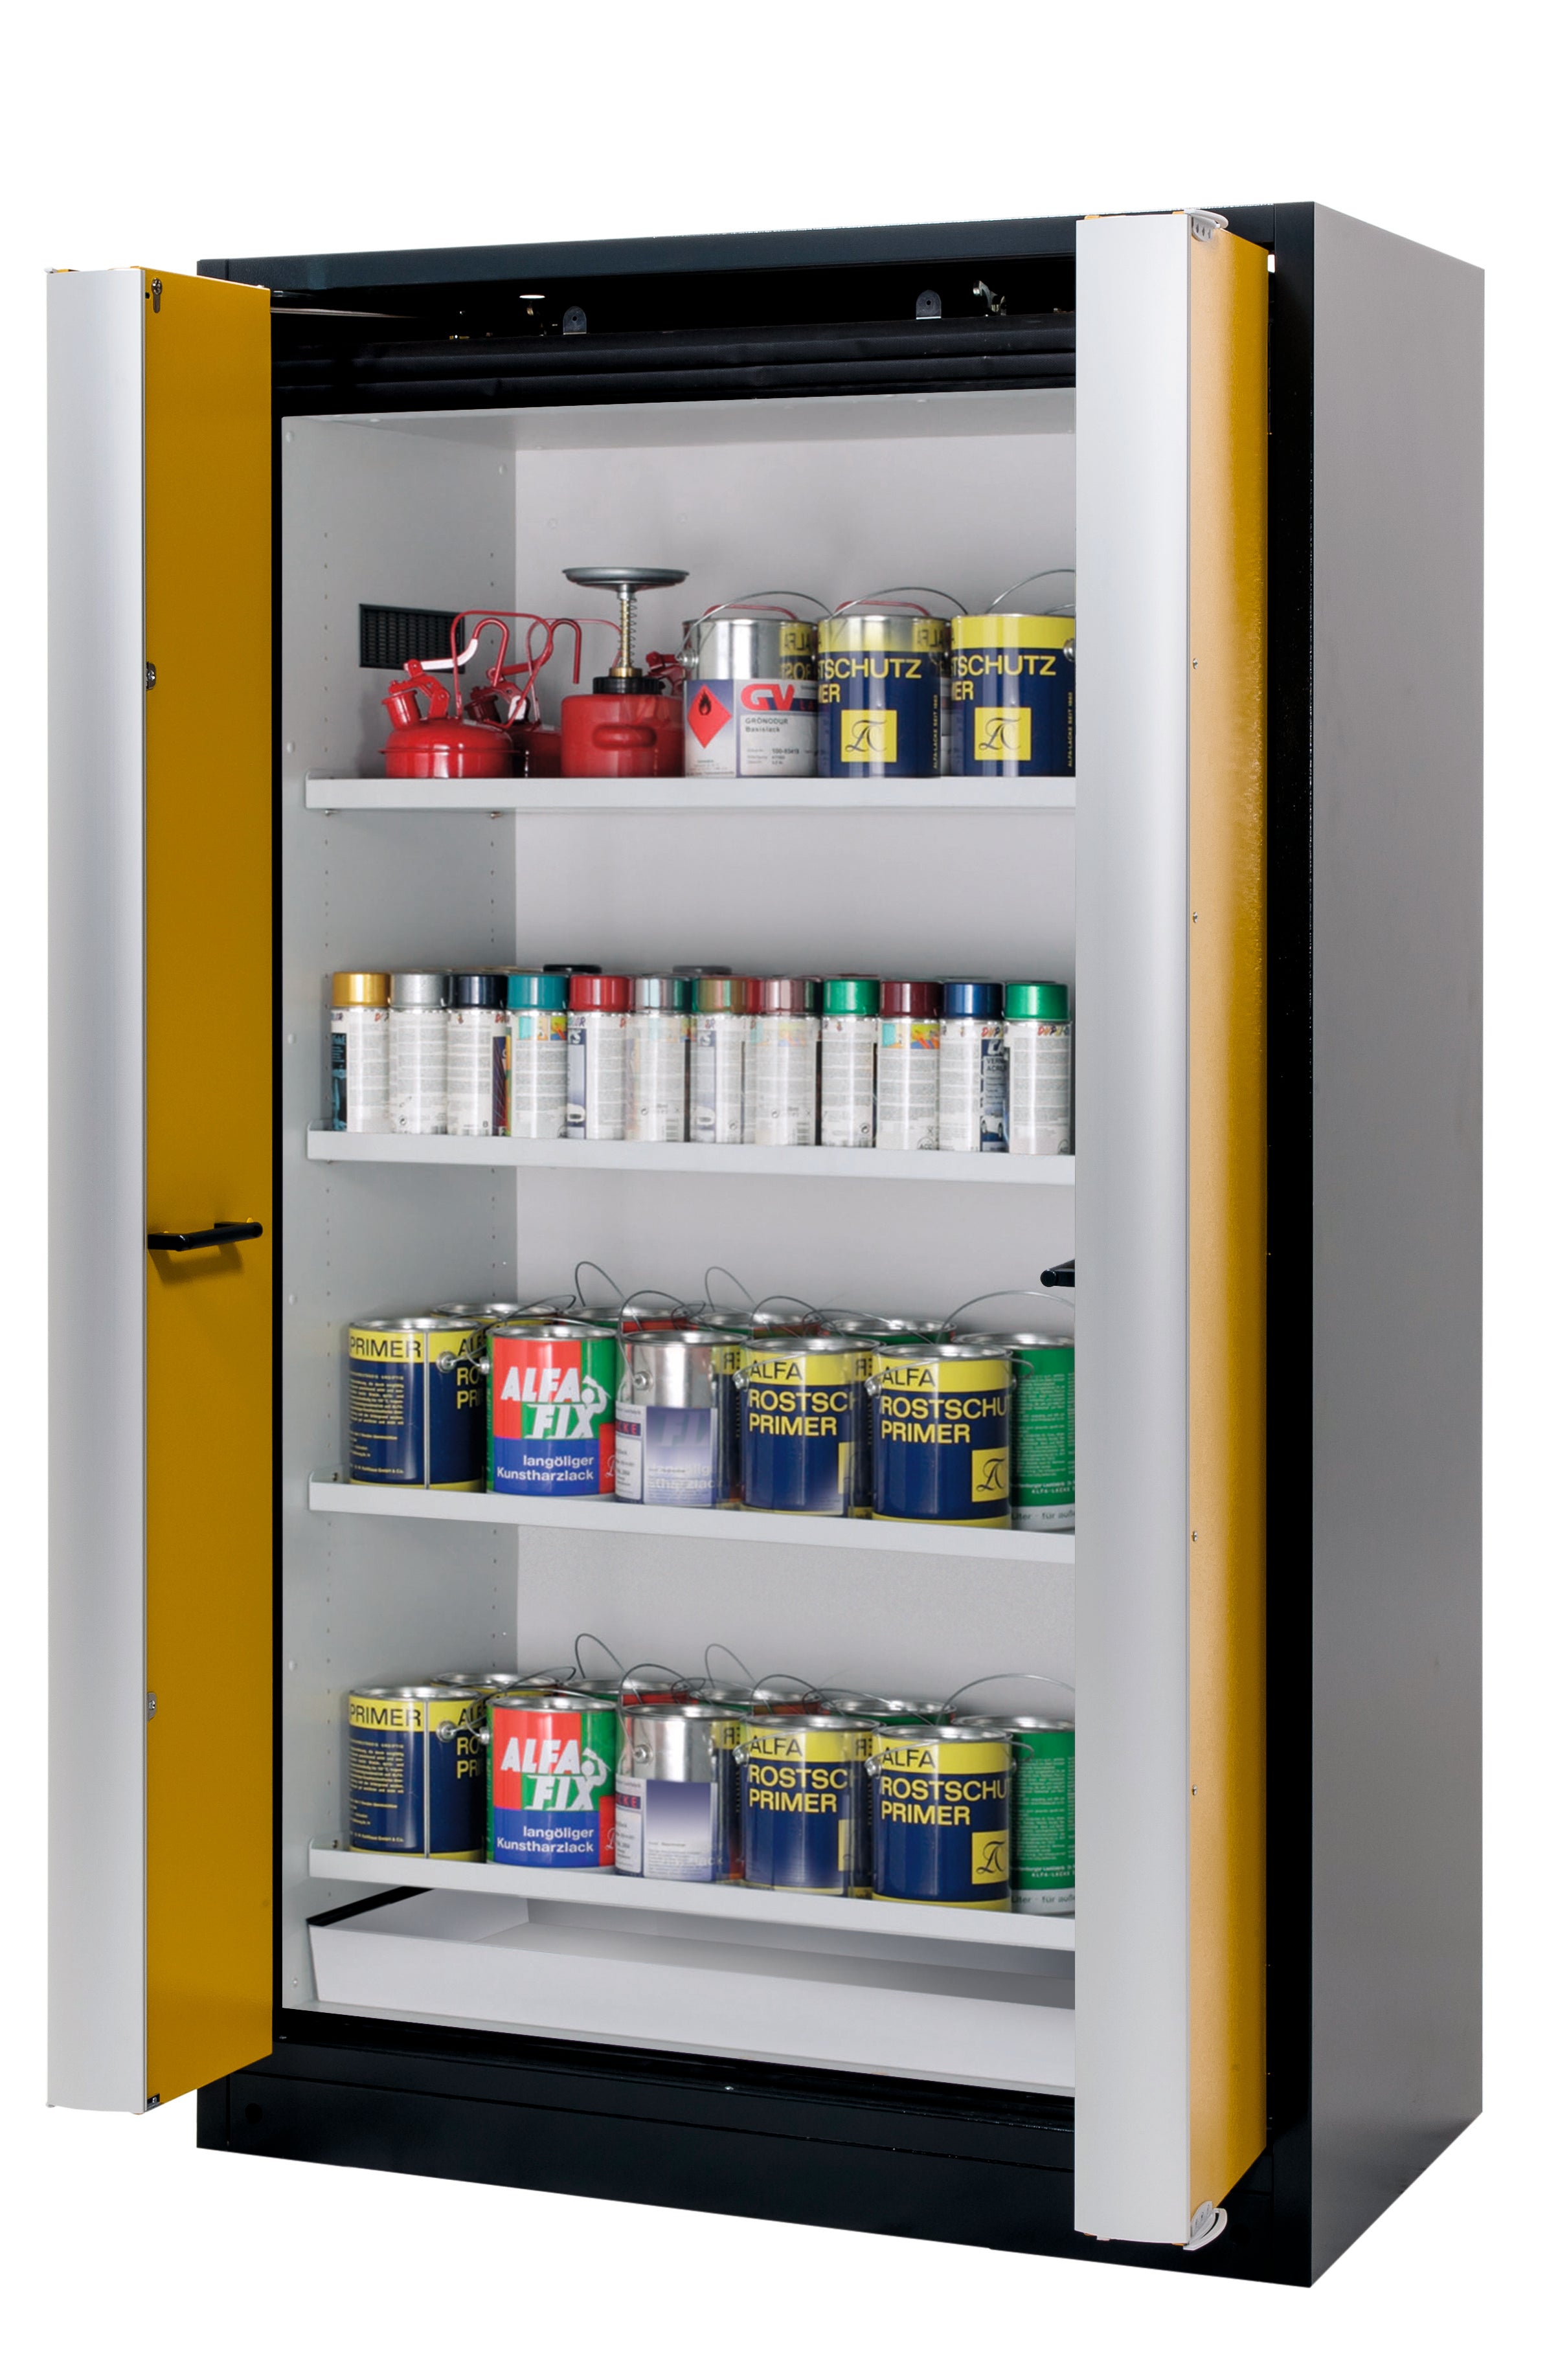 Type 90 safety cabinet Q-PHOENIX-90 model Q90.195.120.FD in safety yellow RAL 1004 with 4x standard shelves (sheet steel)